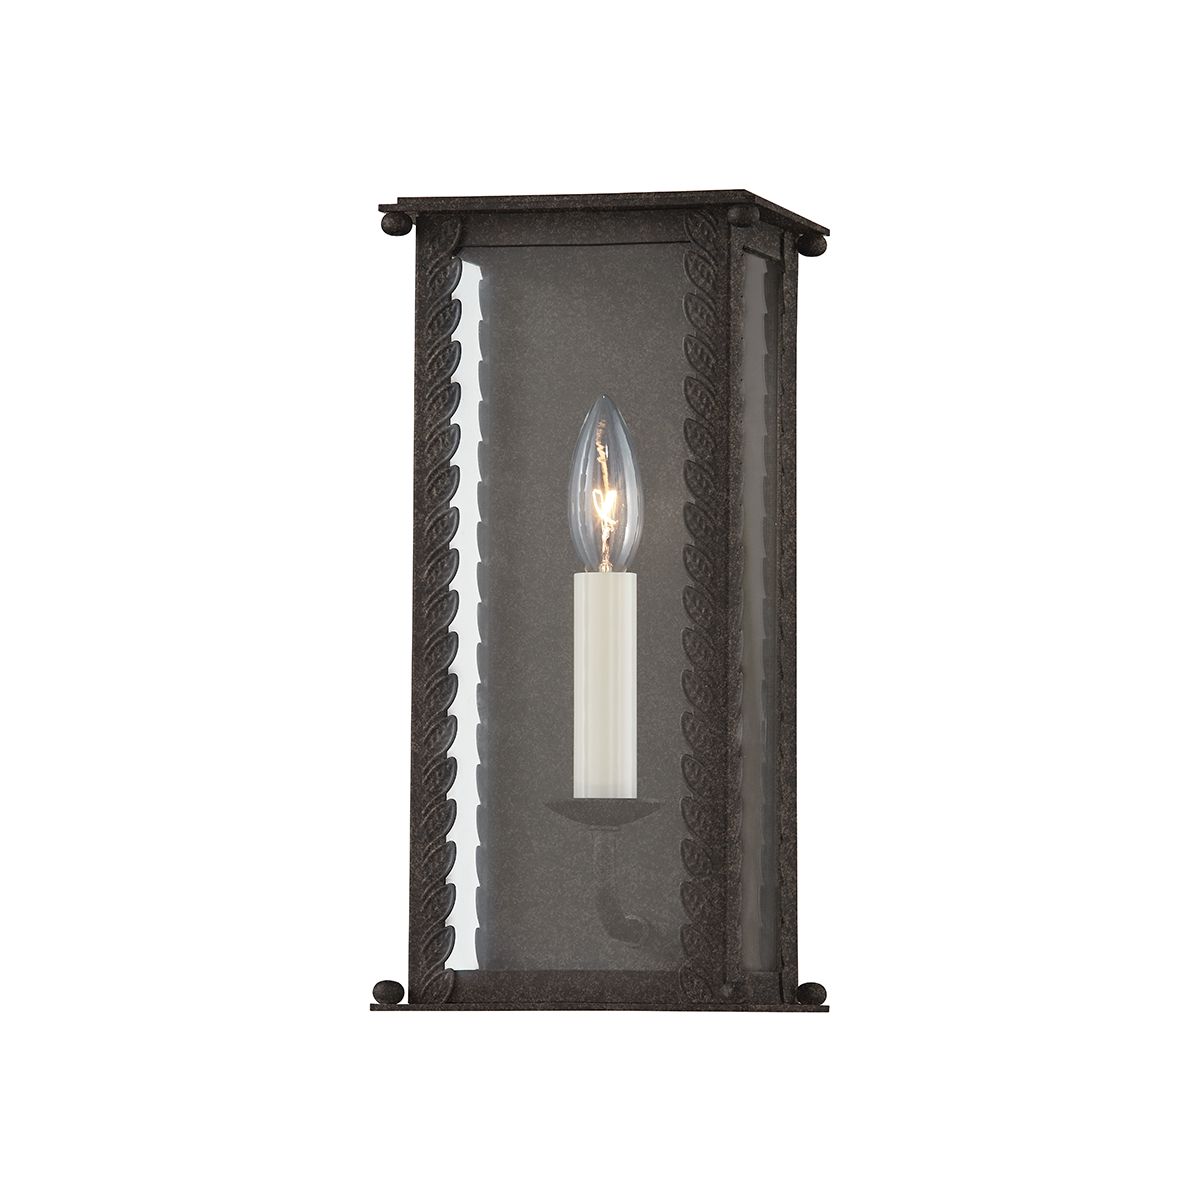 ZUMA 13 in. Outdoor Wall Sconce